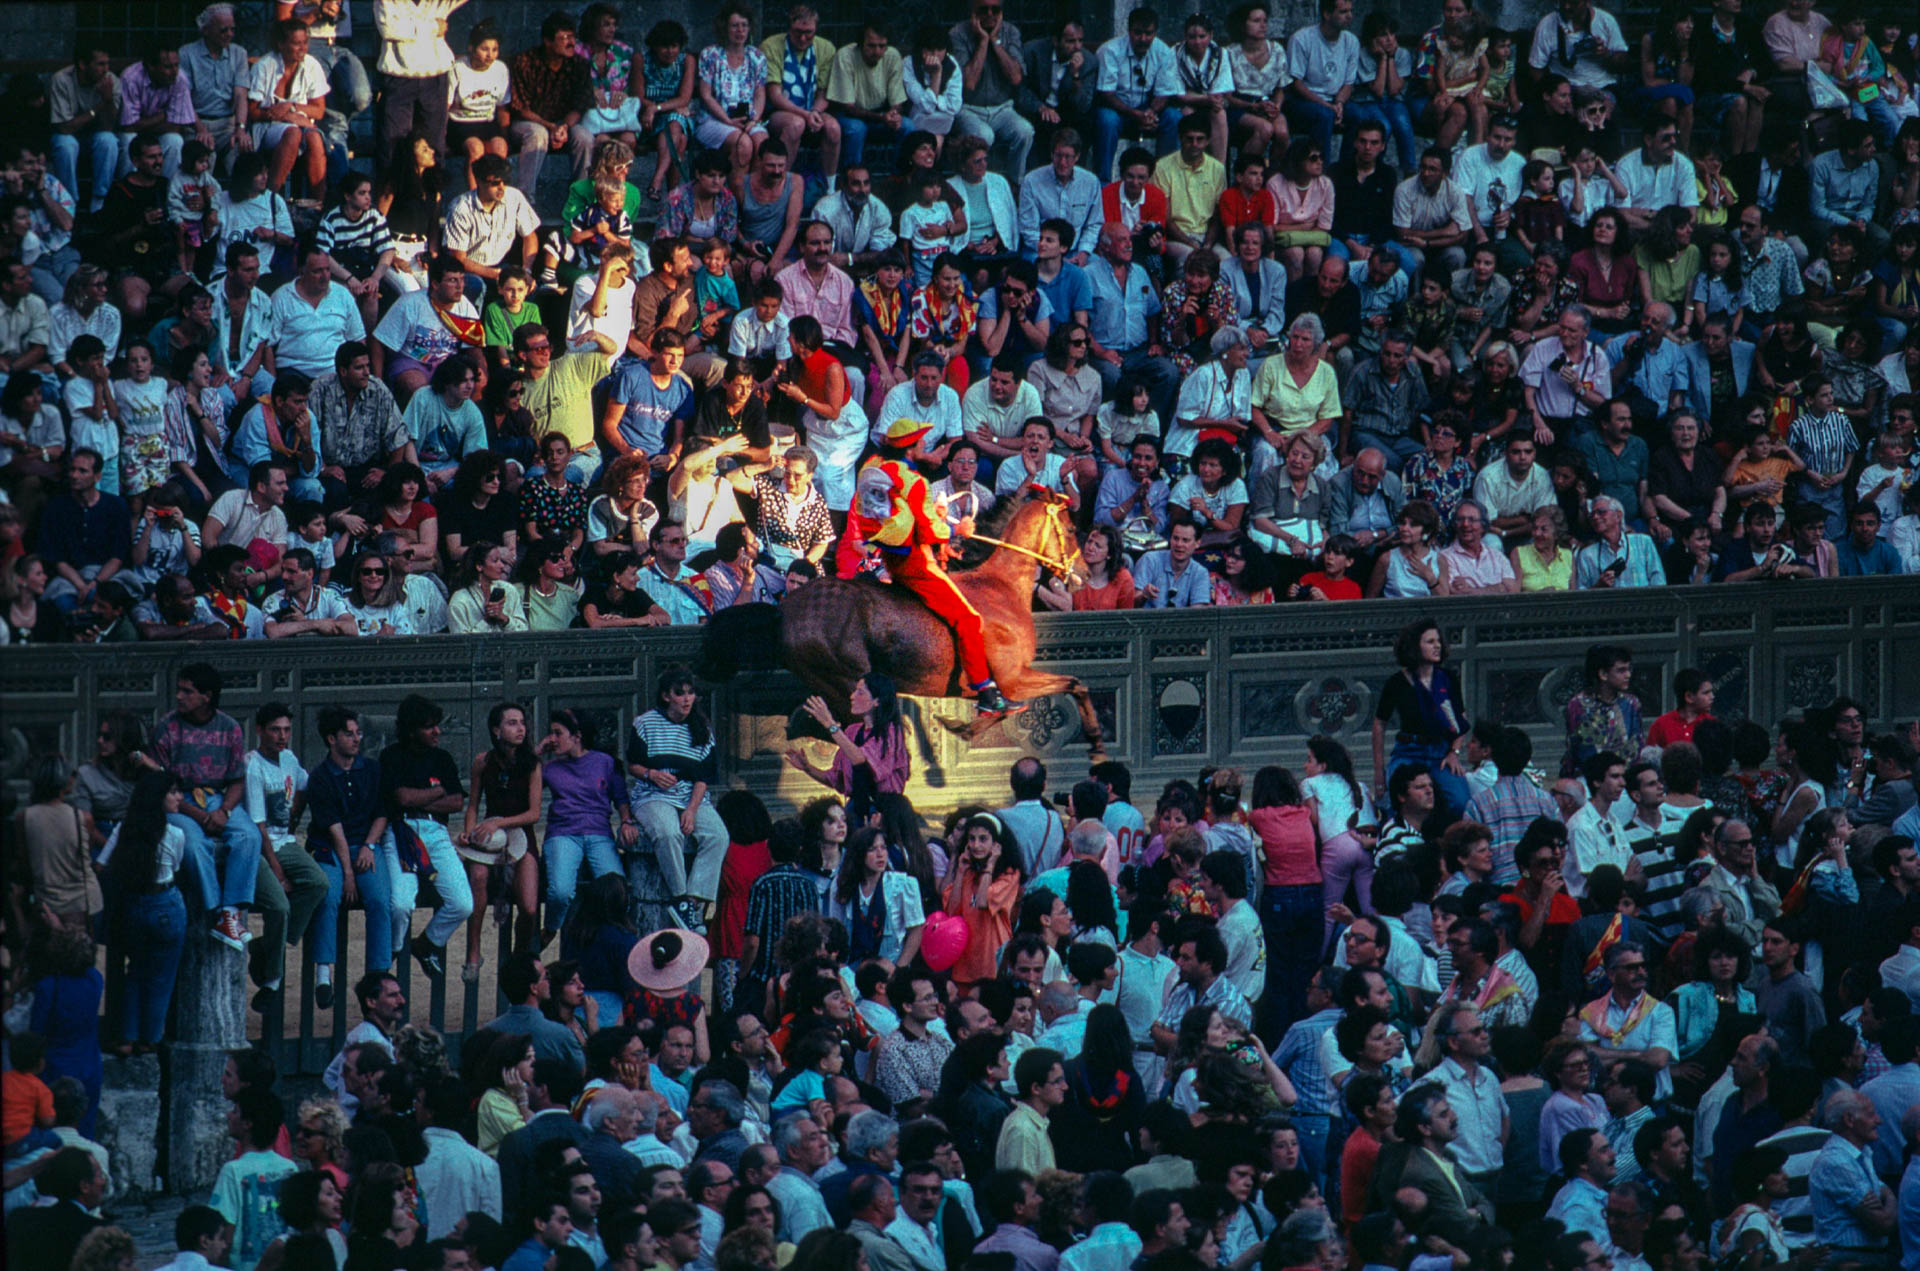  Siena, 1 July 1991 During the final trials, a jockey rides among the crowd waiting for the start of the Palio.&nbsp; 